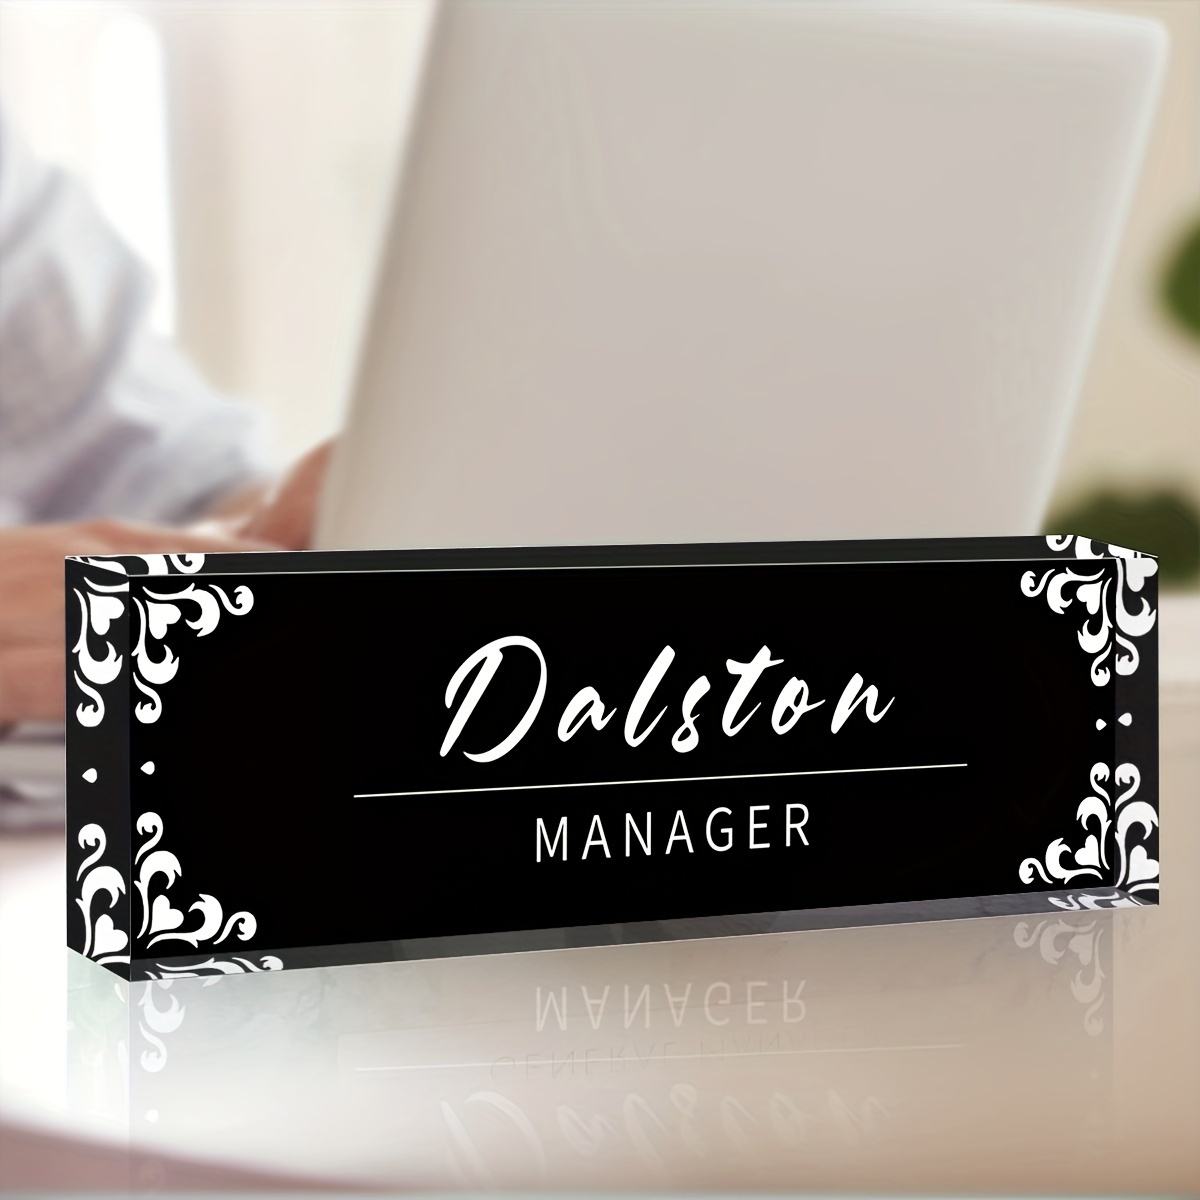 

1pc Desk Name Plate Personalized, Office Decor,name Tags,desk Decorations For Office,acrylic Desk Name Plate,customized Gifts( Black )